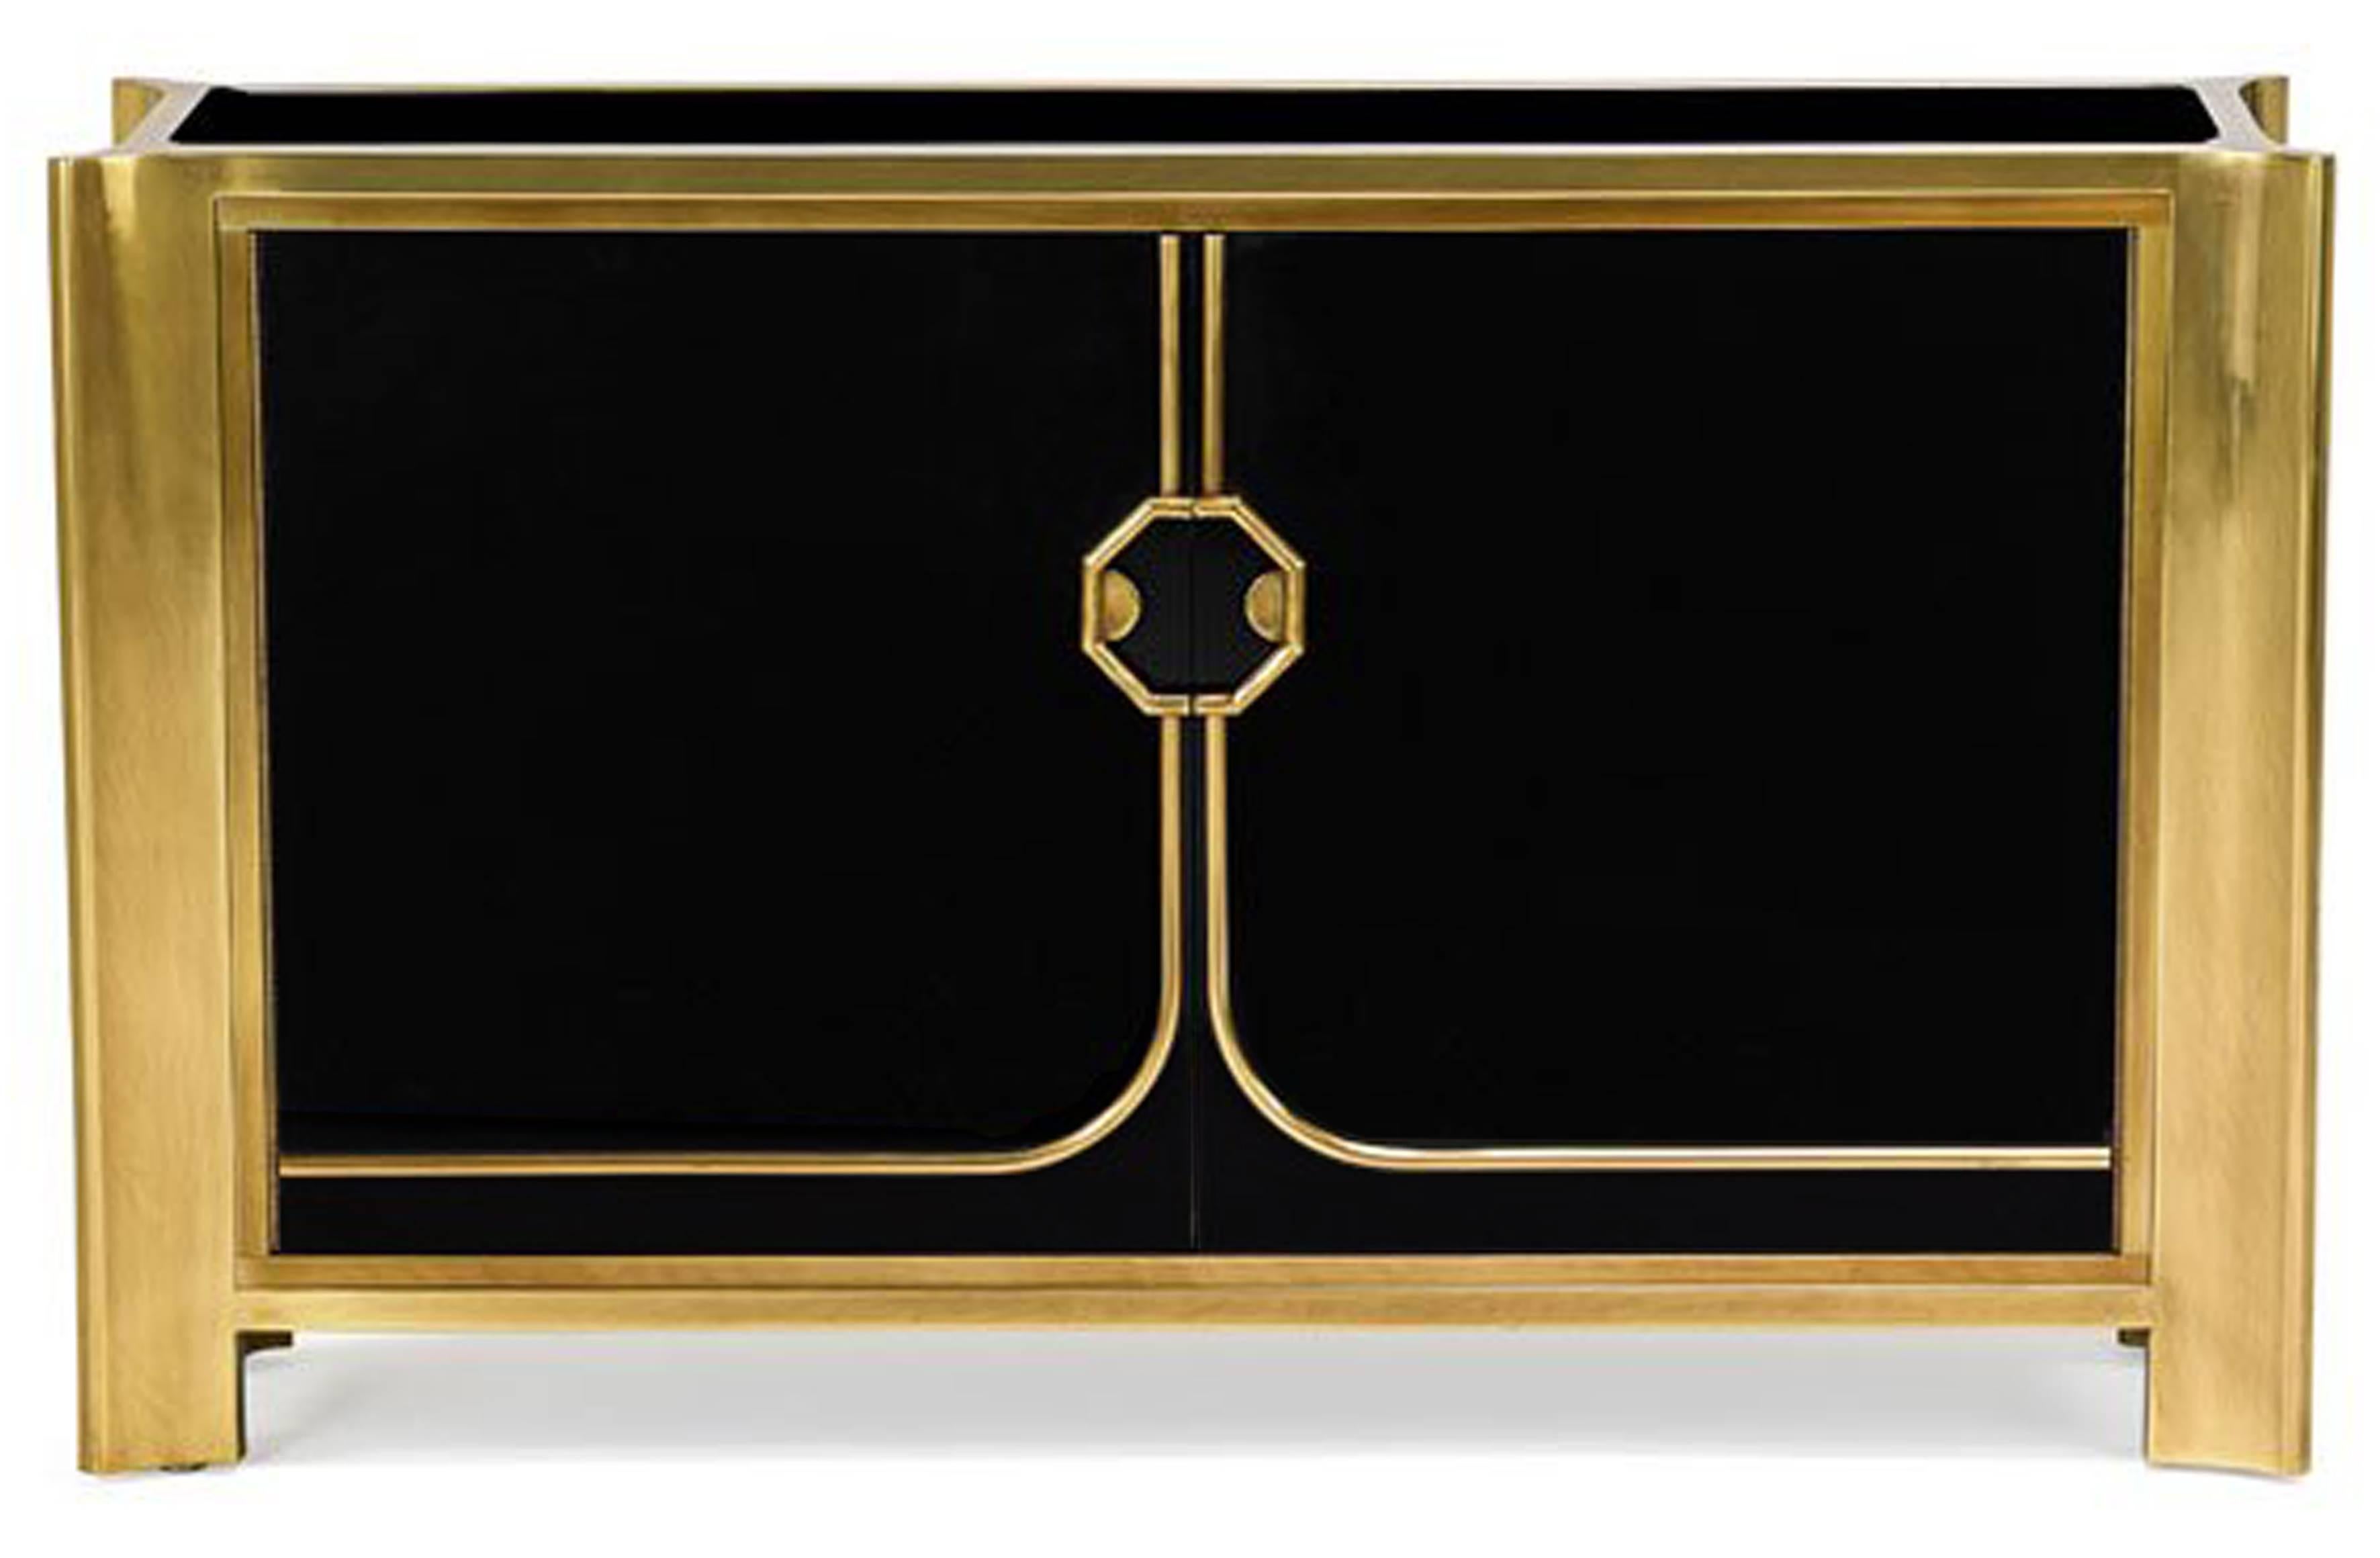 A black lacquered two door cabinet with patinated bronze frame and hardware with one adjustable shelf by Mastercraft, American, 1970s.